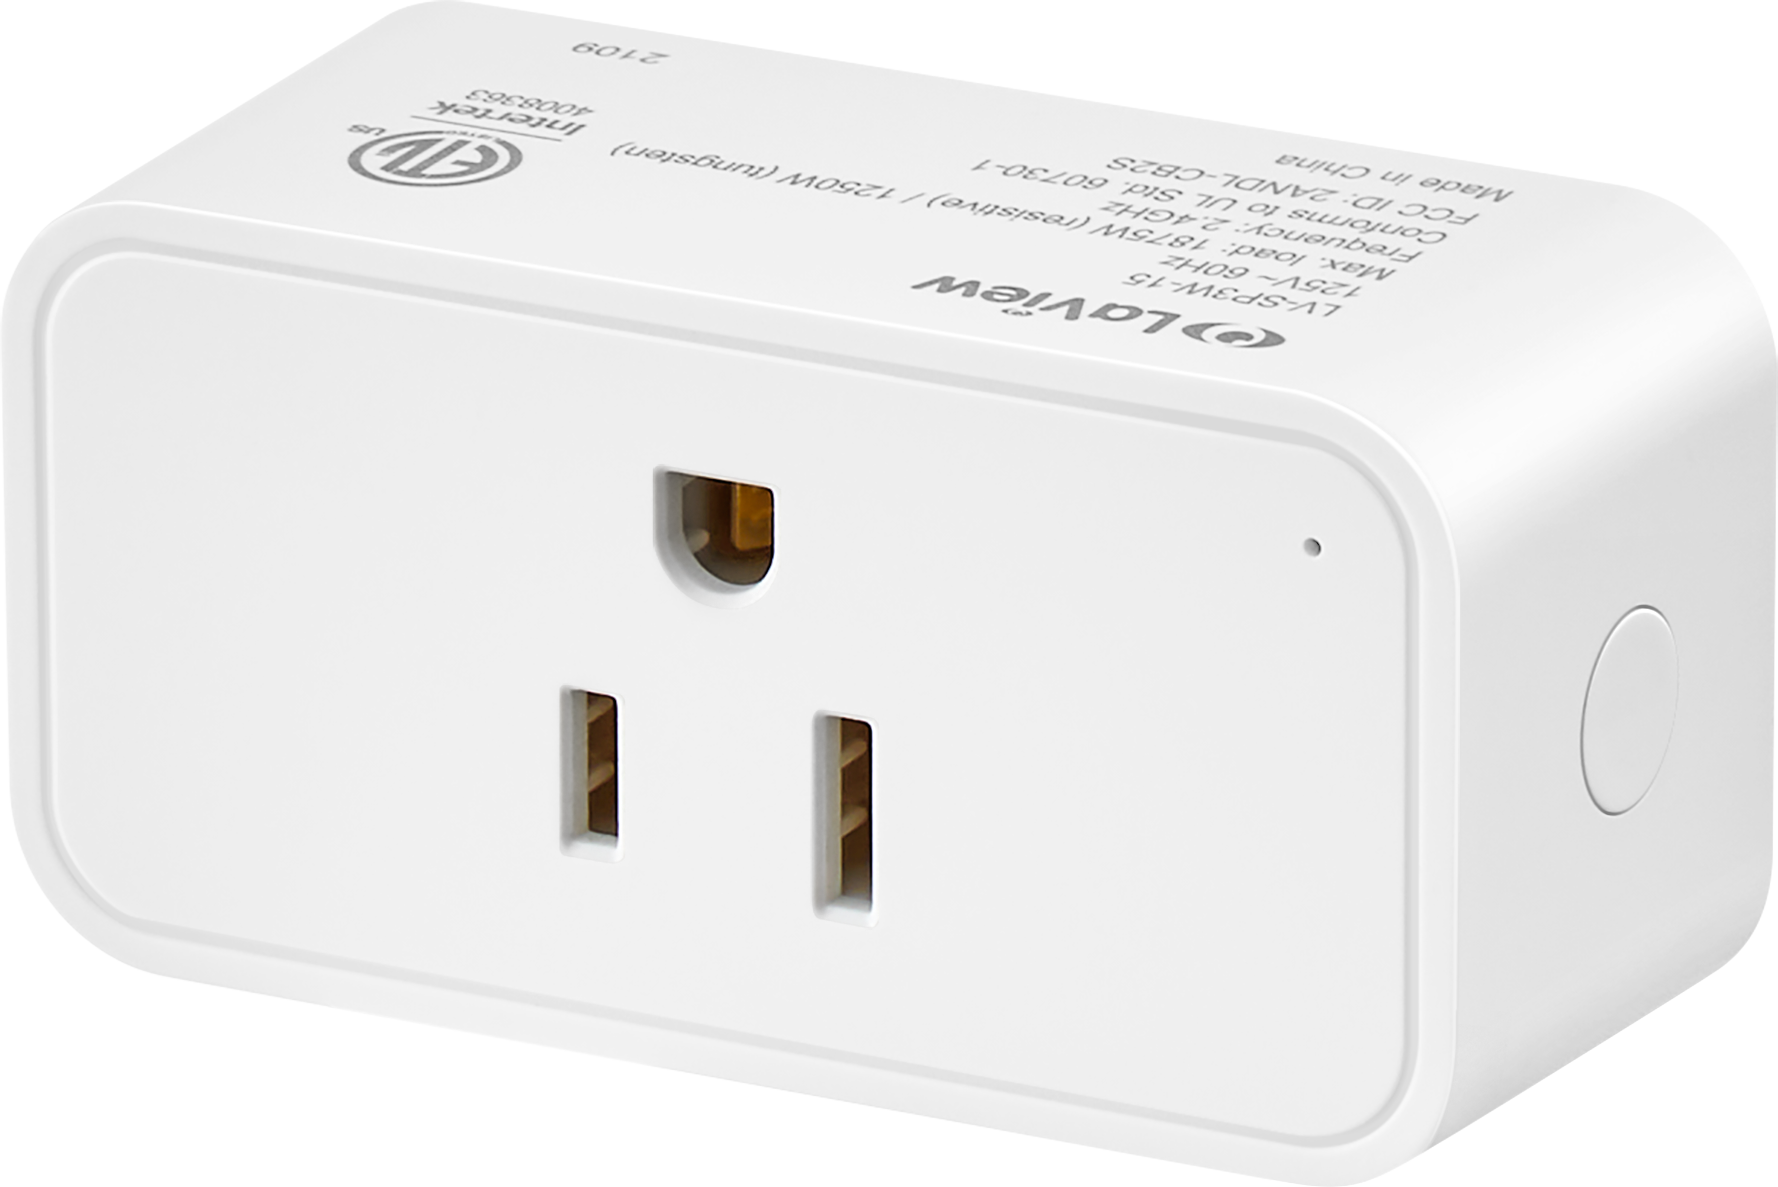 Merkury Innovations Indoor/Outdoor Wi-Fi Smart Plug, Requires 2.4 GHz Wi-Fi  (Green) 